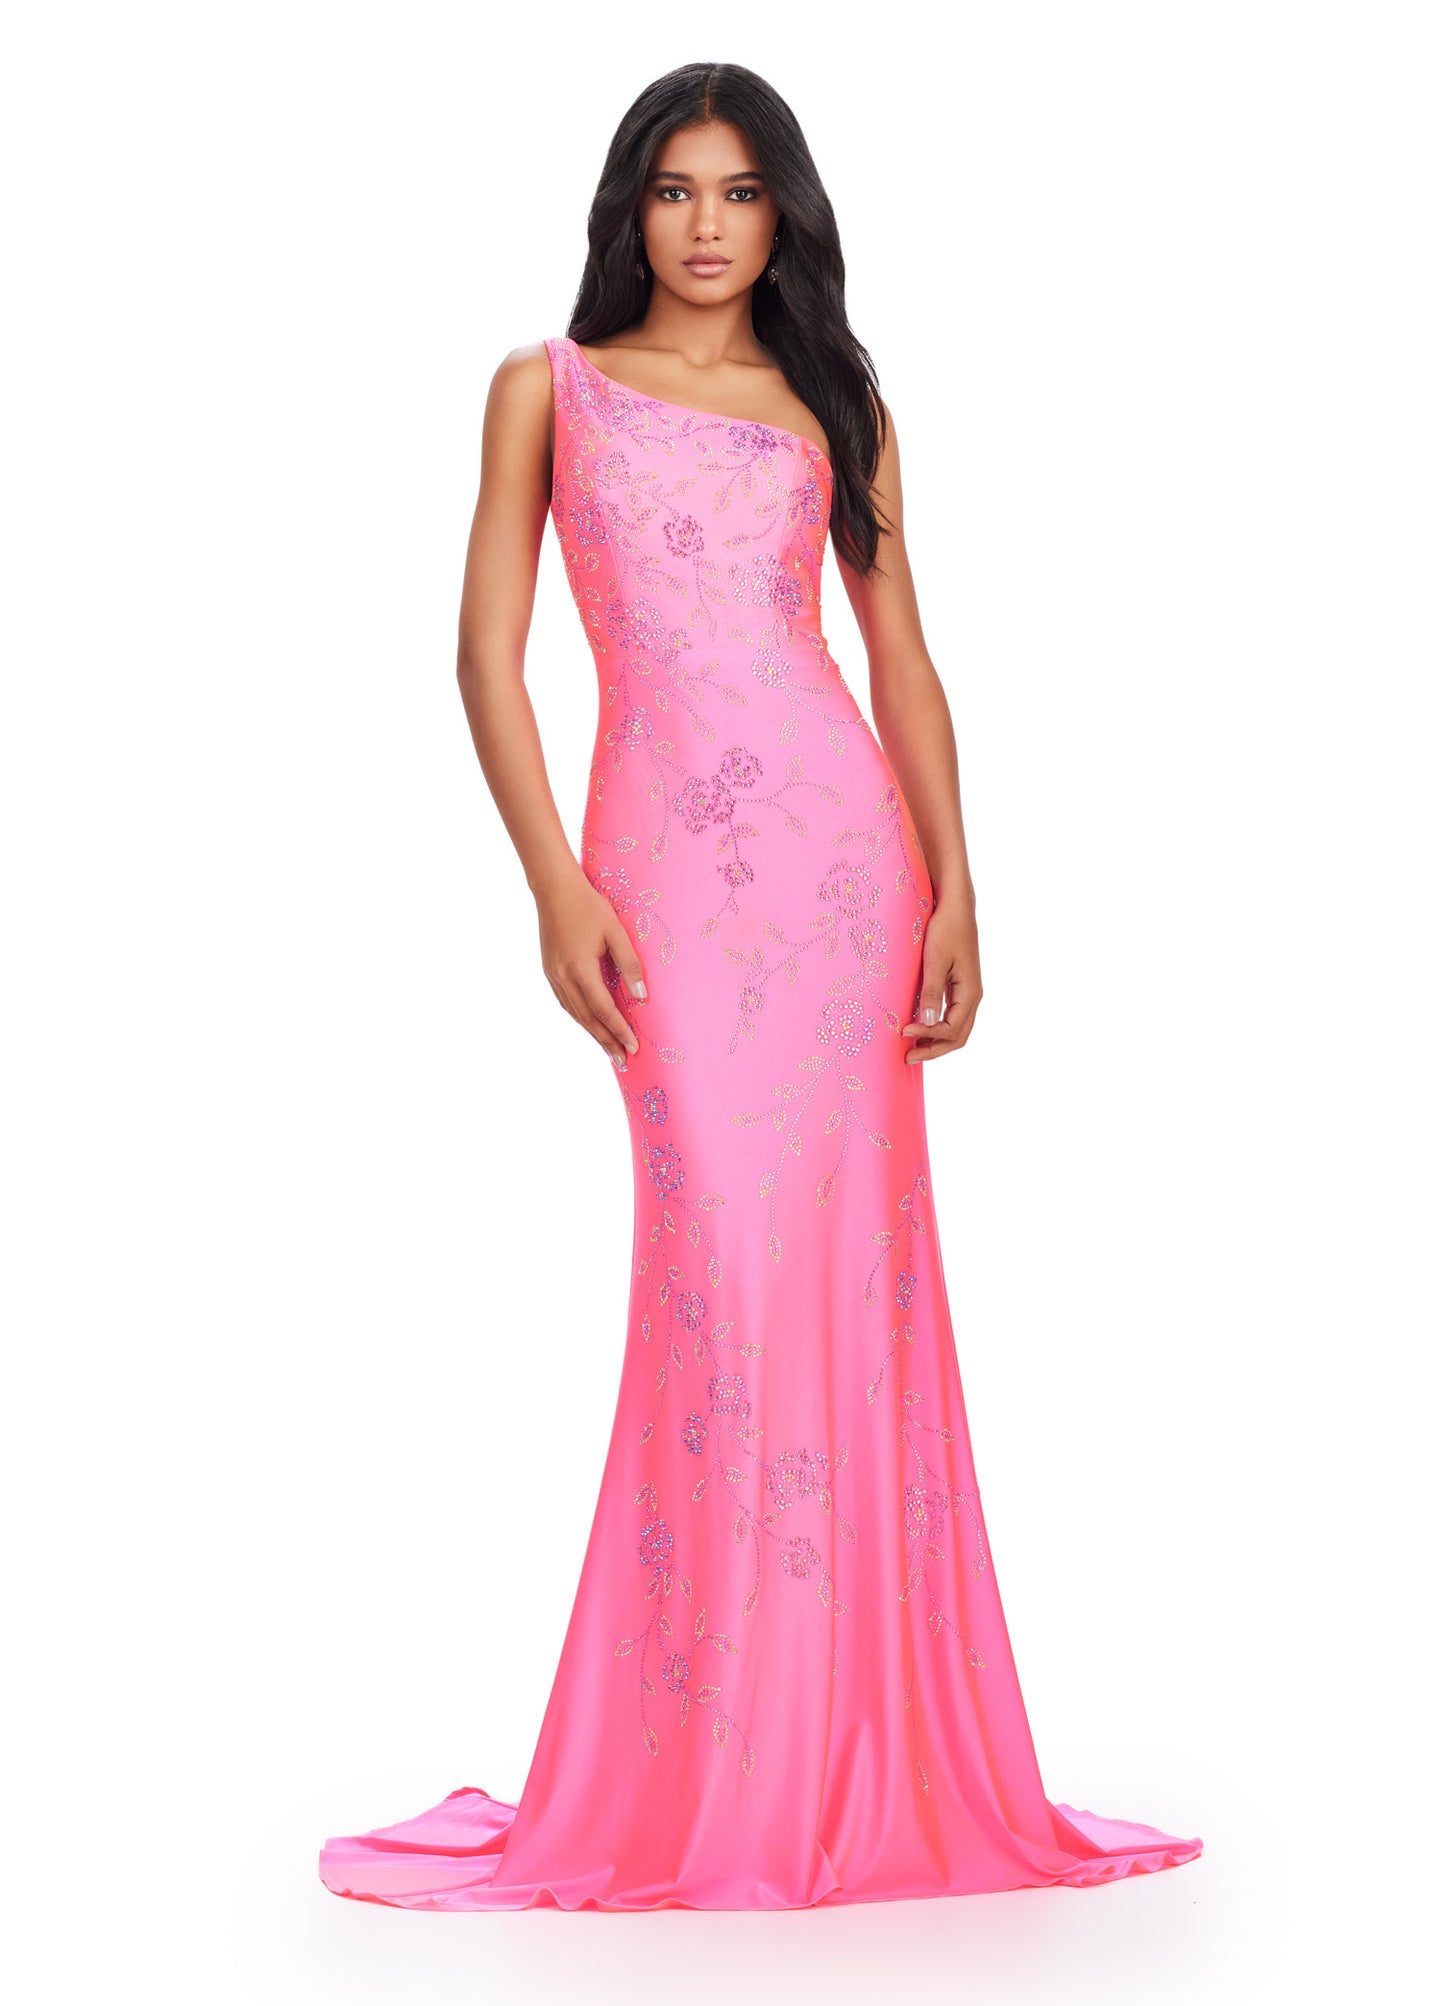 Make a stunning entrance in the Ashely Lauren 11525 Long Prom Dress. Featuring a one shoulder design and a press on floral bead pattern, this gown exudes sophistication and elegance. The jersey fabric offers a comfortable and flattering fit, perfect for any formal occasion. Make a statement in this pageant-worthy gown. This one shoulder jersey gown features a delicate multi-colored heat set stone floral bead pattern that cascades down onto the skirt.